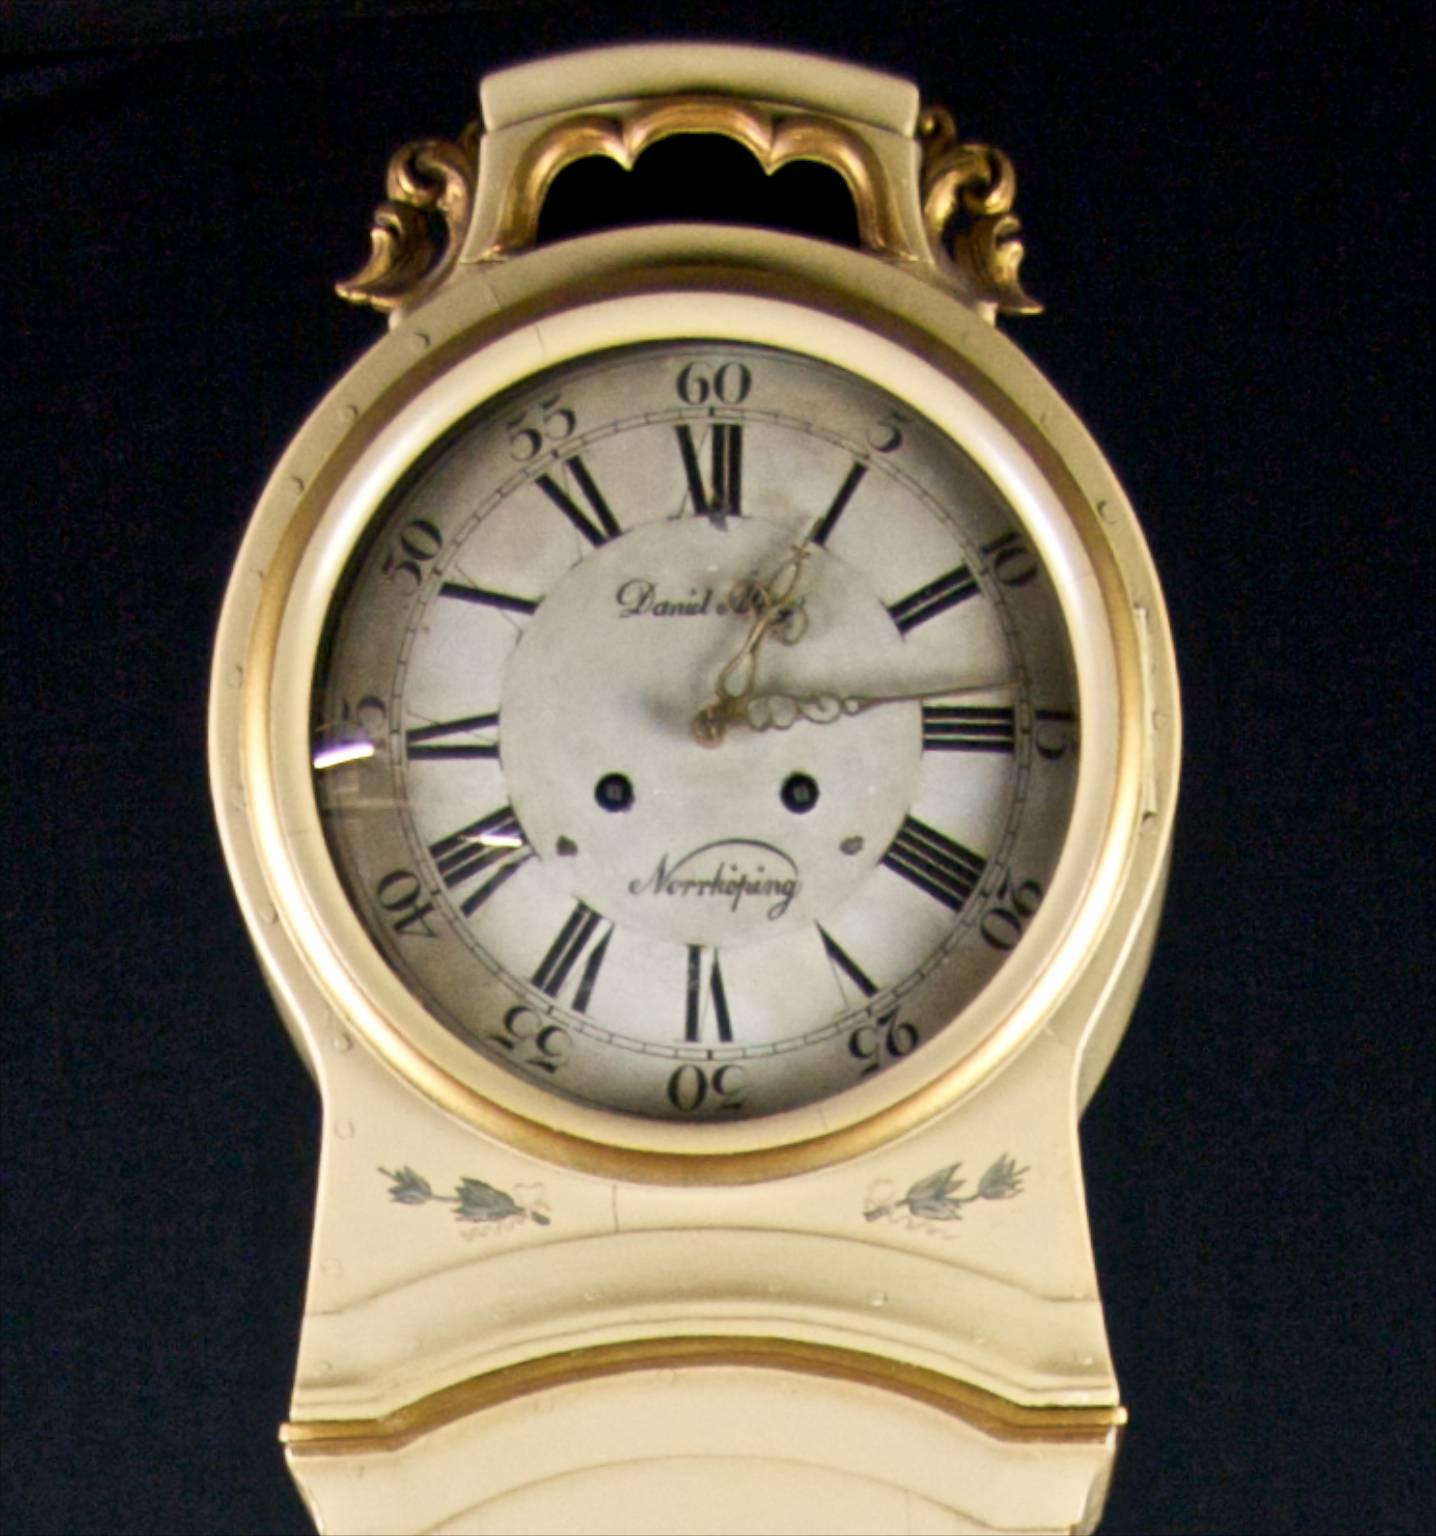 Early 1800s Mora clock with stunning handpainted trompe l'oeil flower wreathes and patterns with sumptuous carved detail on the hood and plinth.

This mora clock is a unique find, great shape and wonderful detail. Incredible to look at. It has a